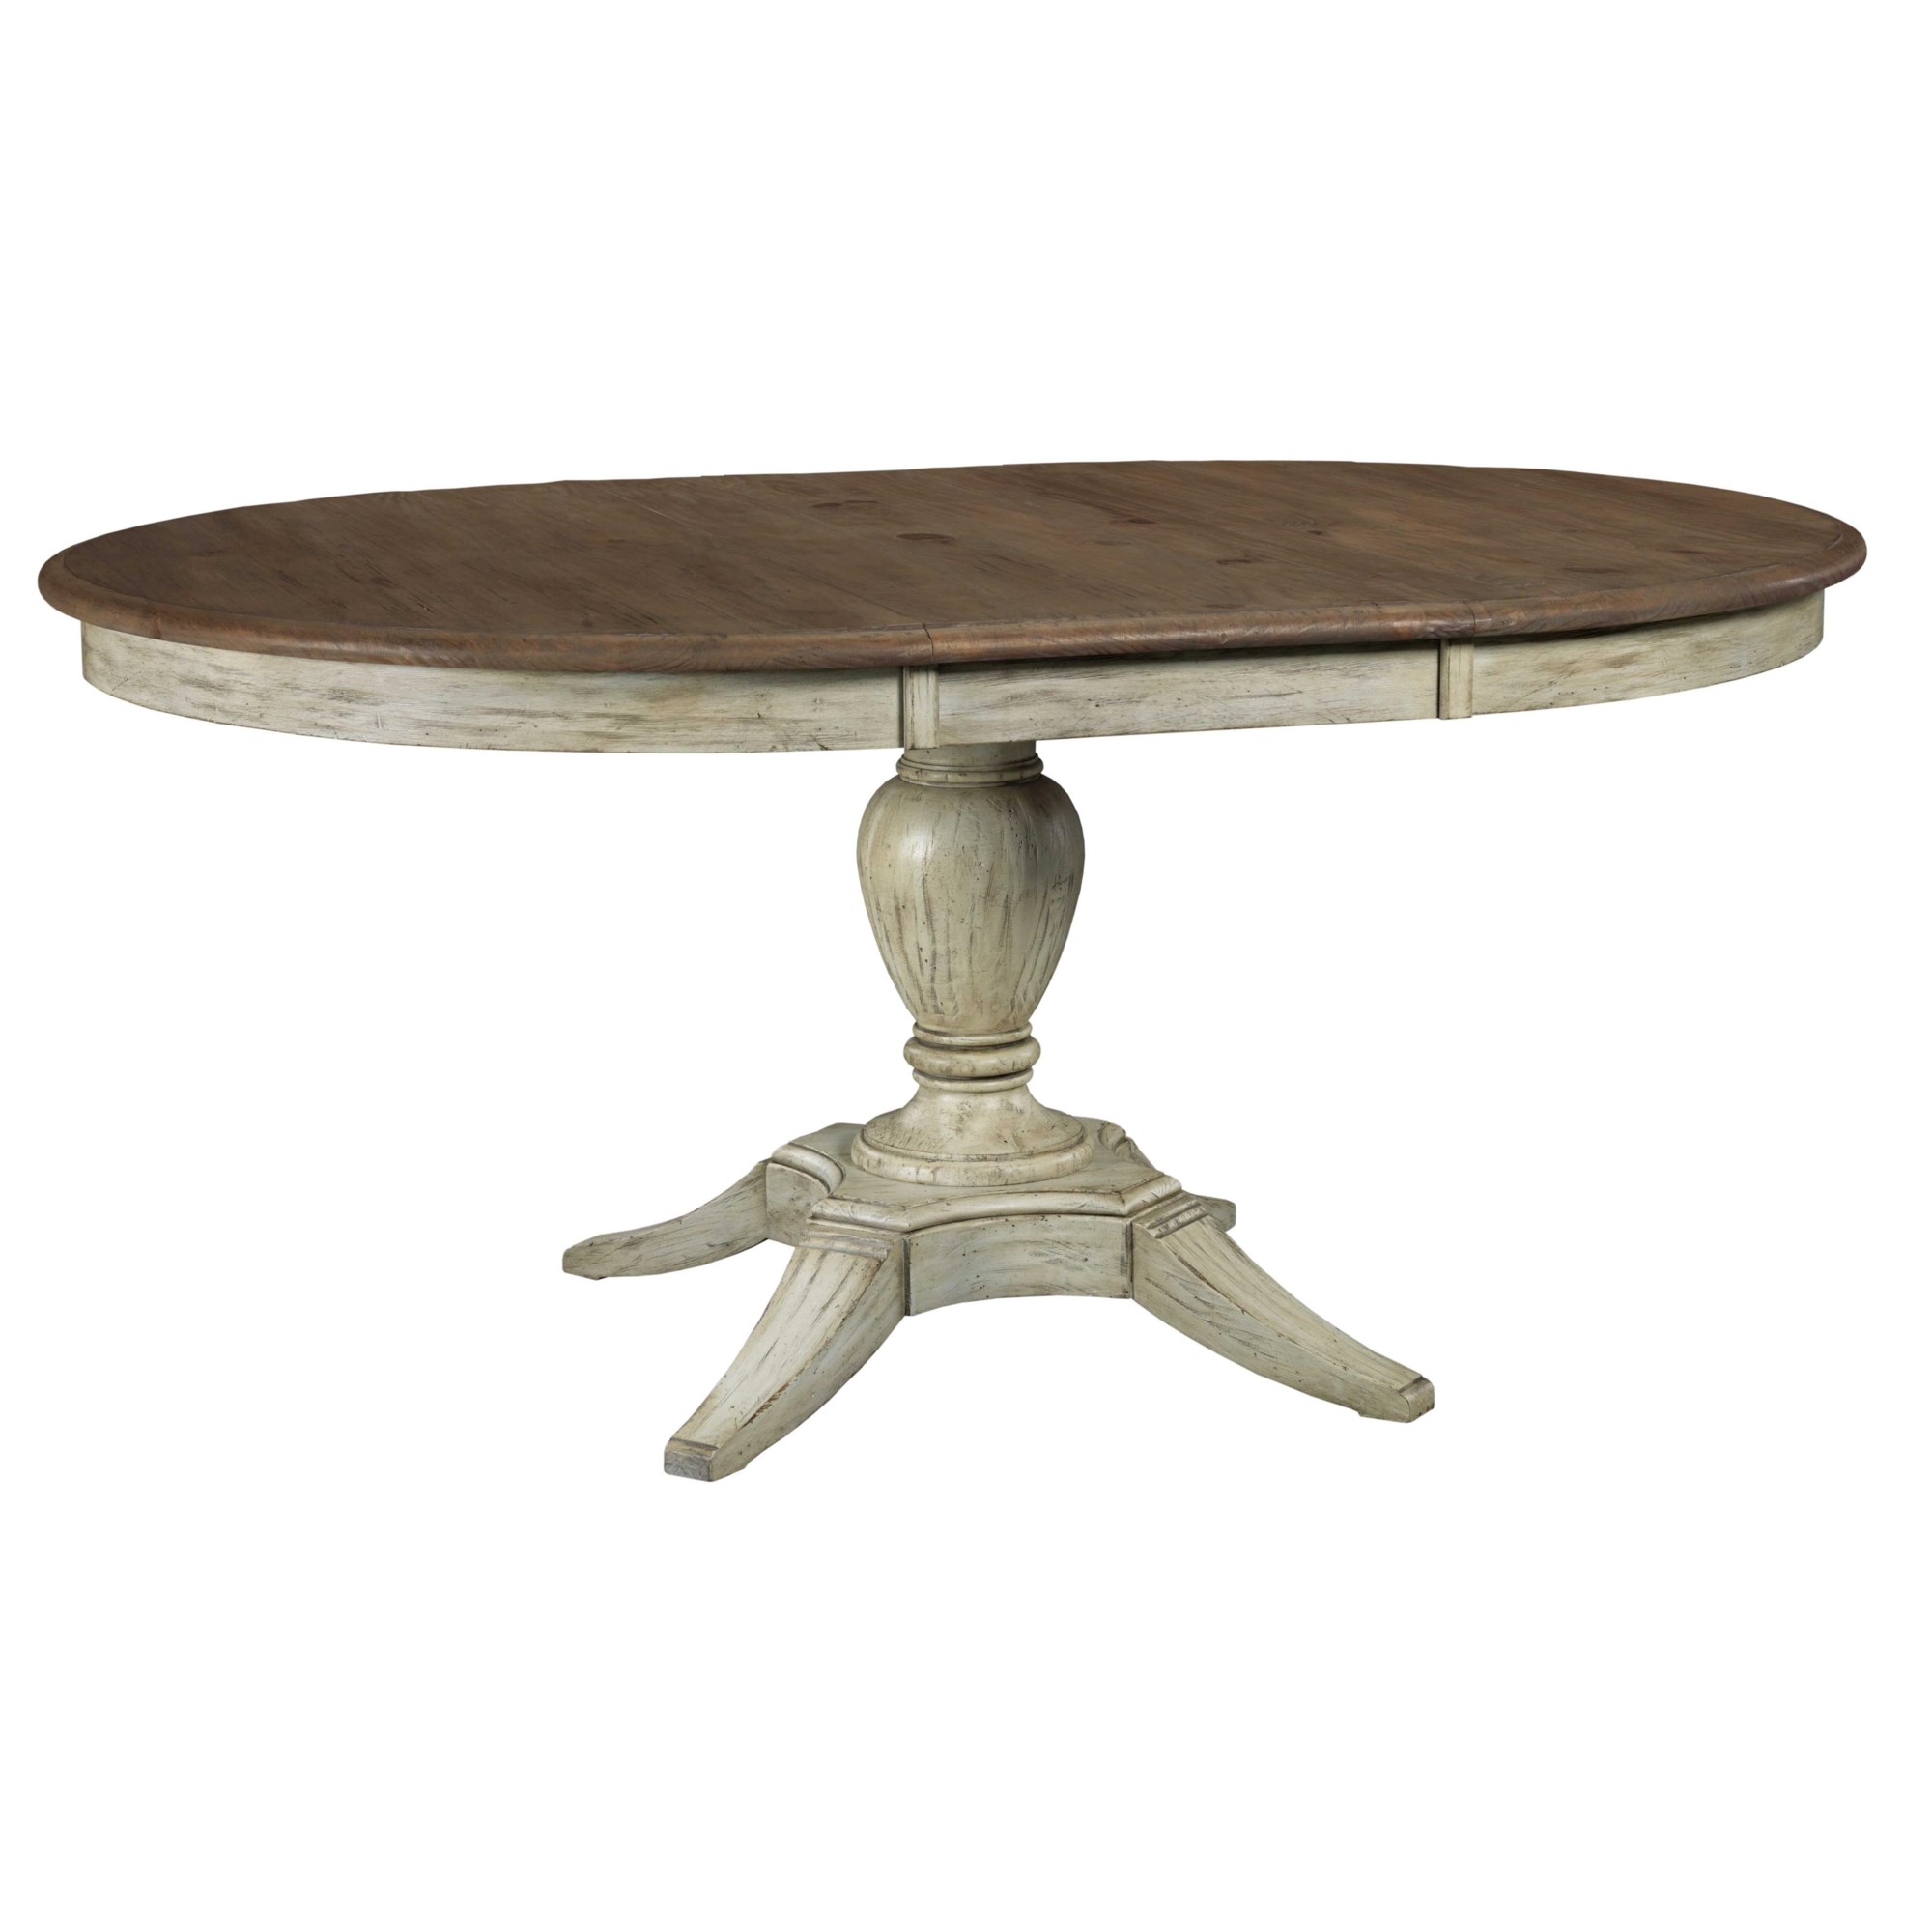 Woodford 120cm Round Dining Table